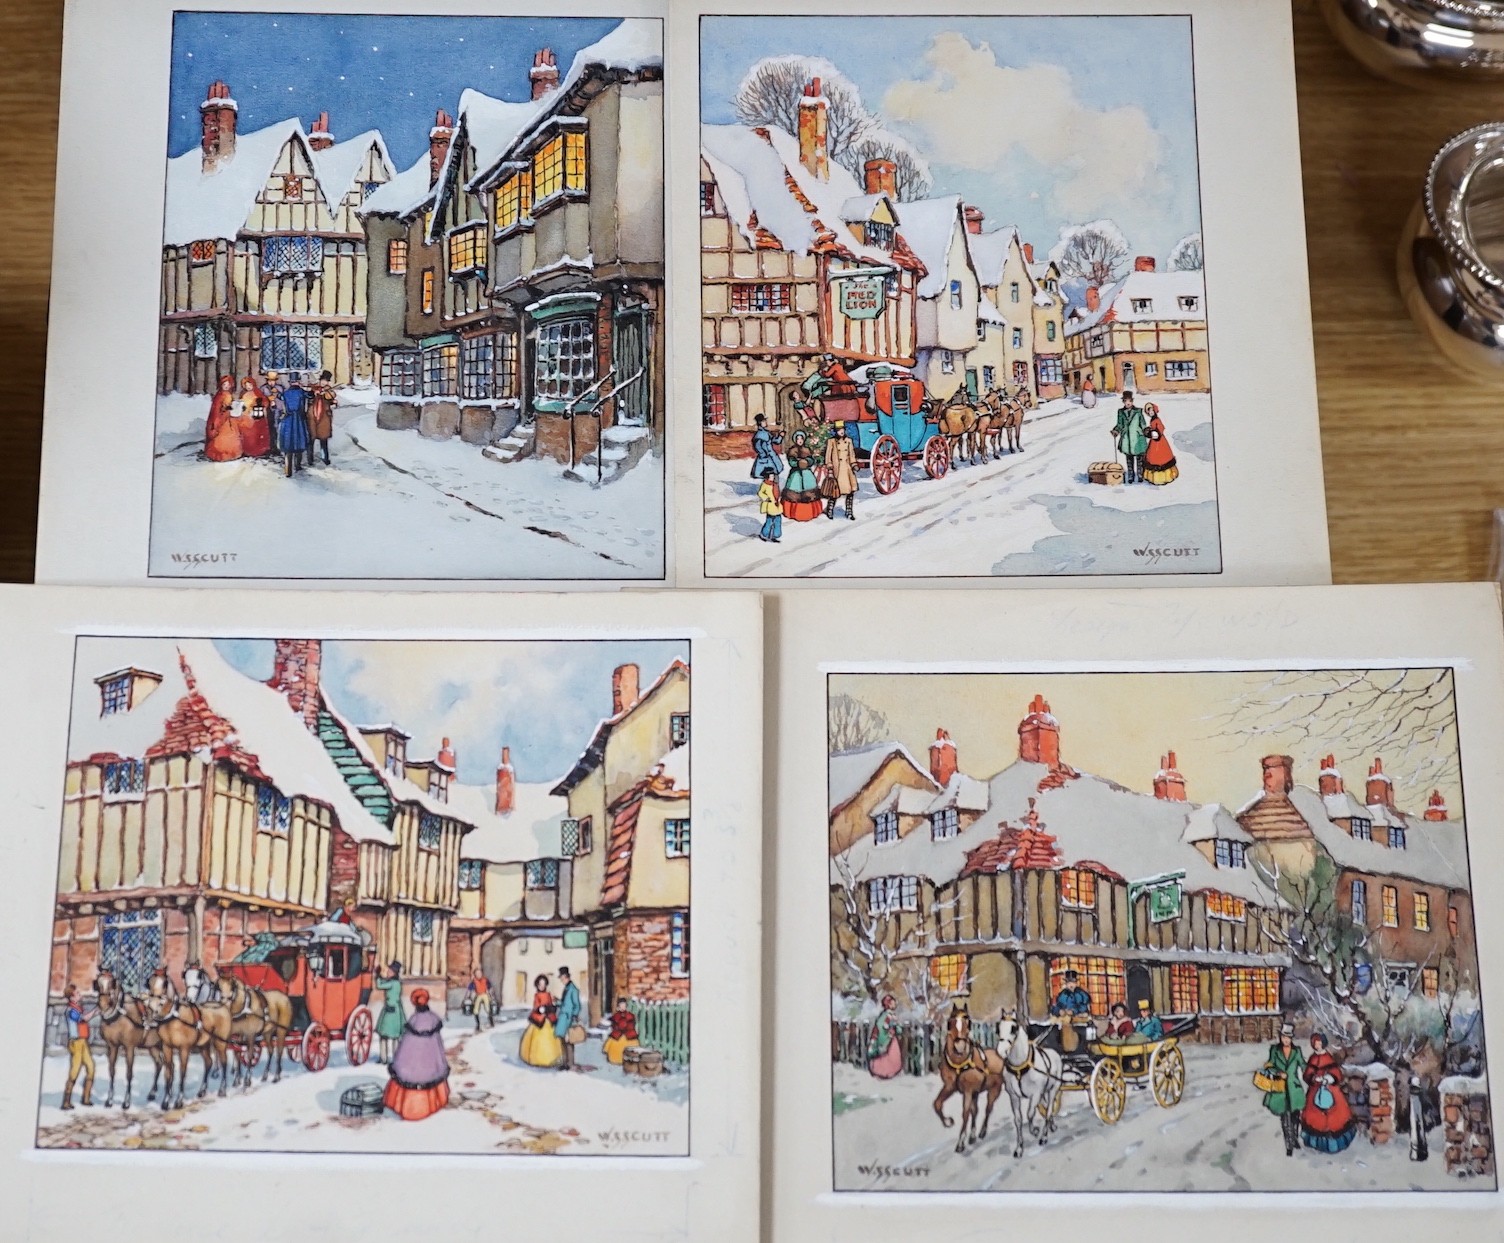 W.S. Scutt, ink and watercolour, vintage greeting card designs, Victorian winter scenes, overall 24 x 20cm, unframed, together with two Savile Lumley vintage Christmas card designs, Victorian coaching scenes, signed, lar